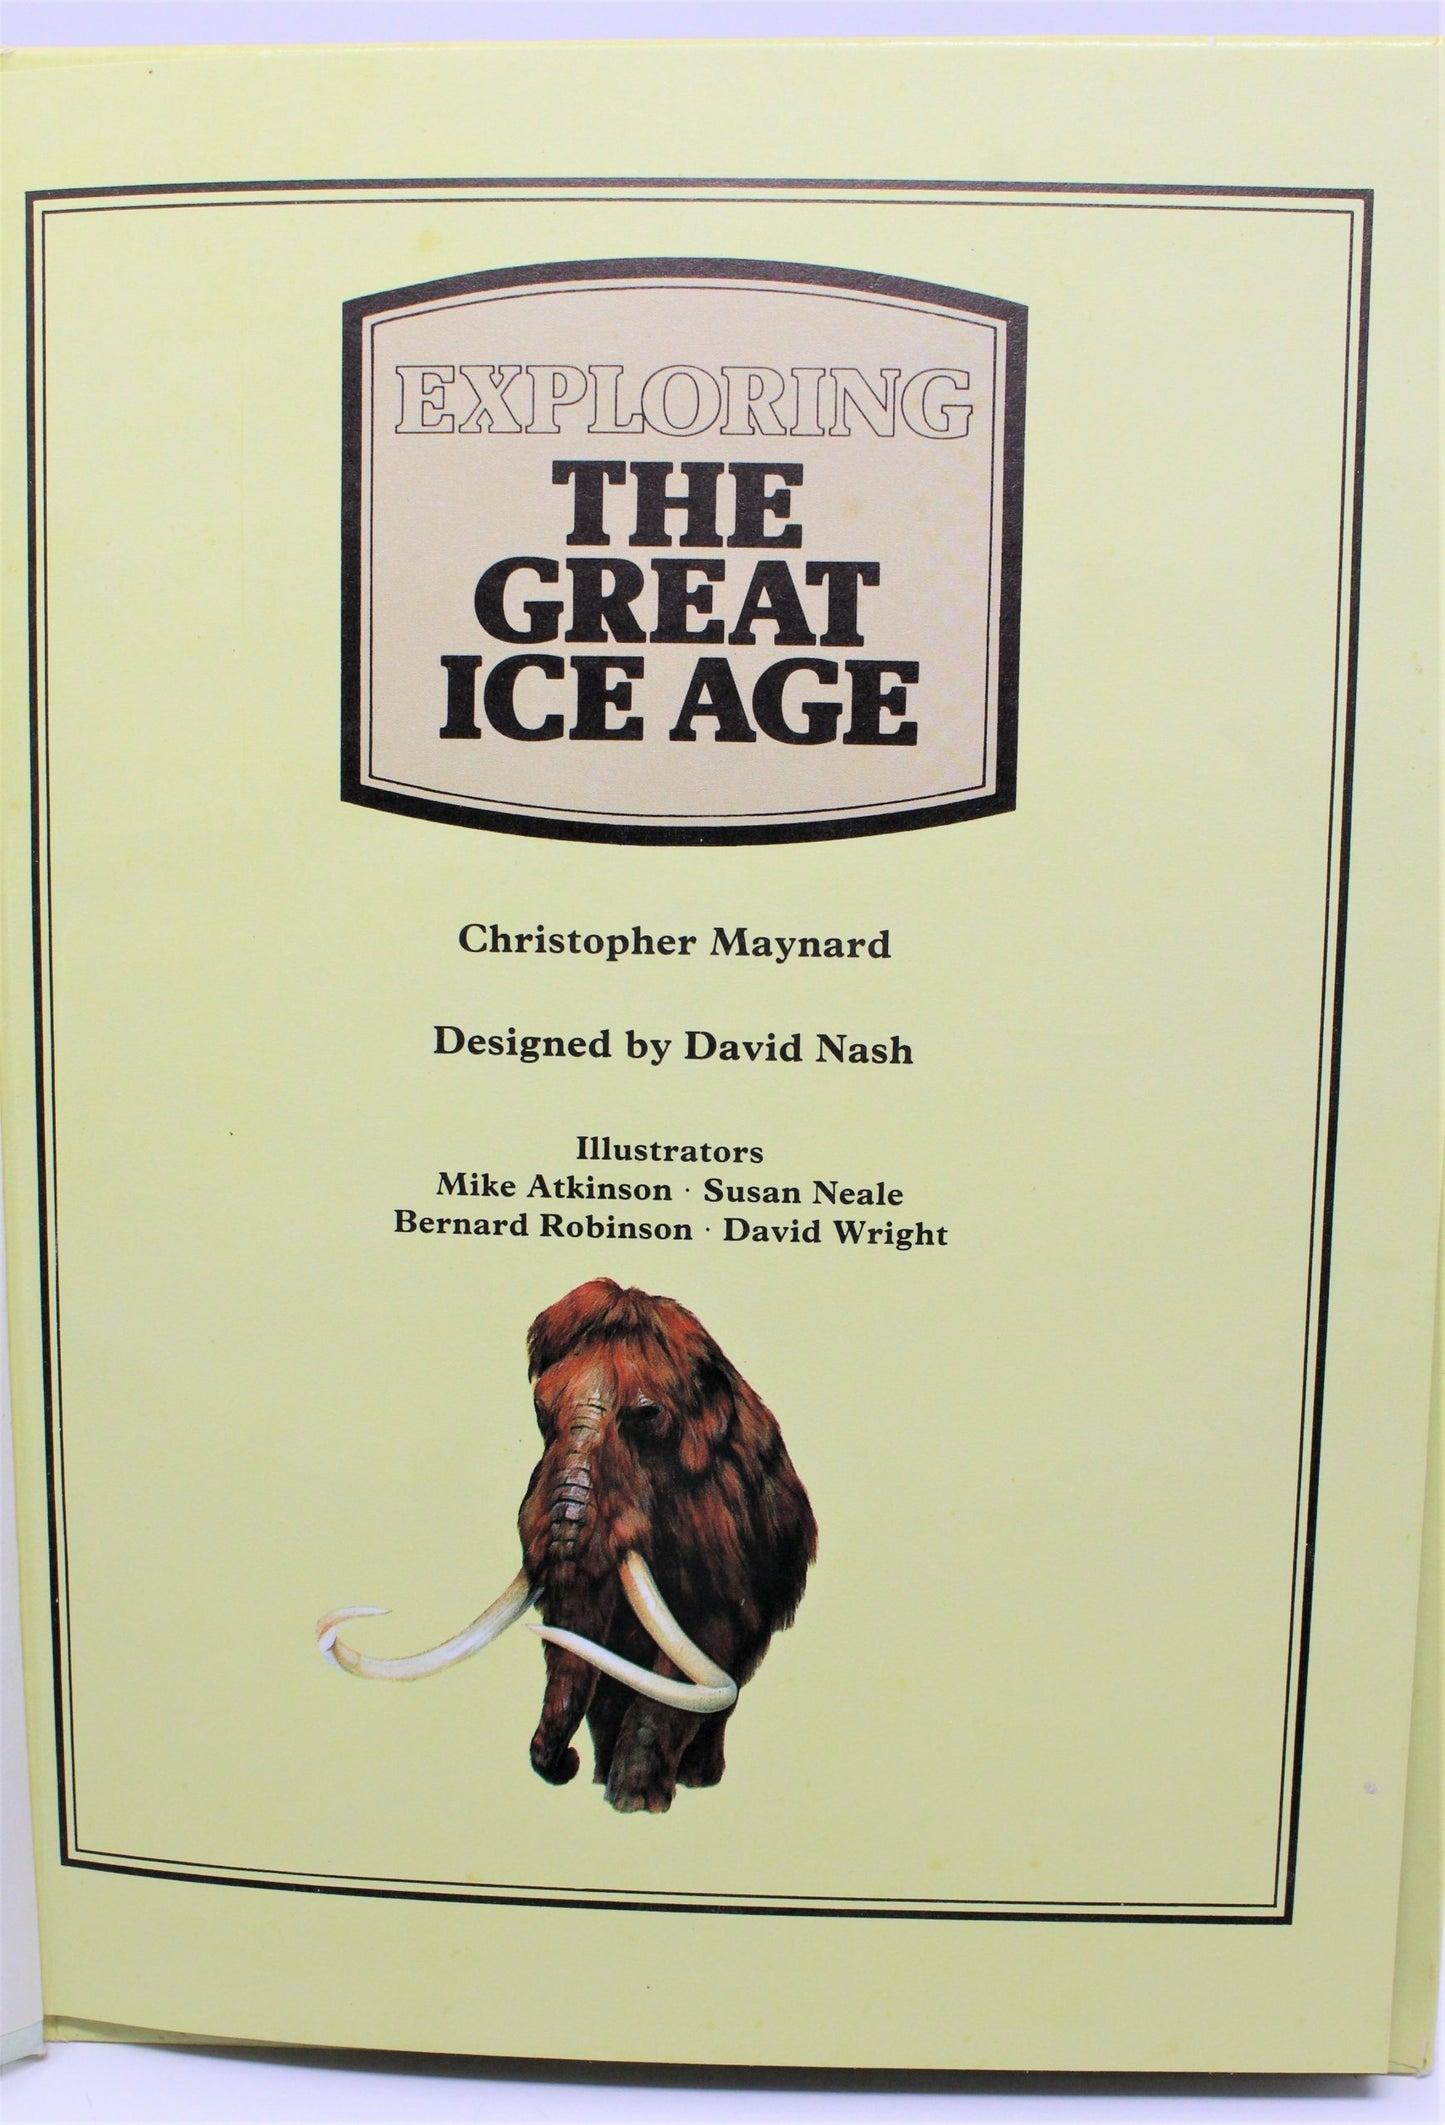 Children's Book, Exploring The Great Ice Age, Chris Maynard, Hardcover, Vintage 1978